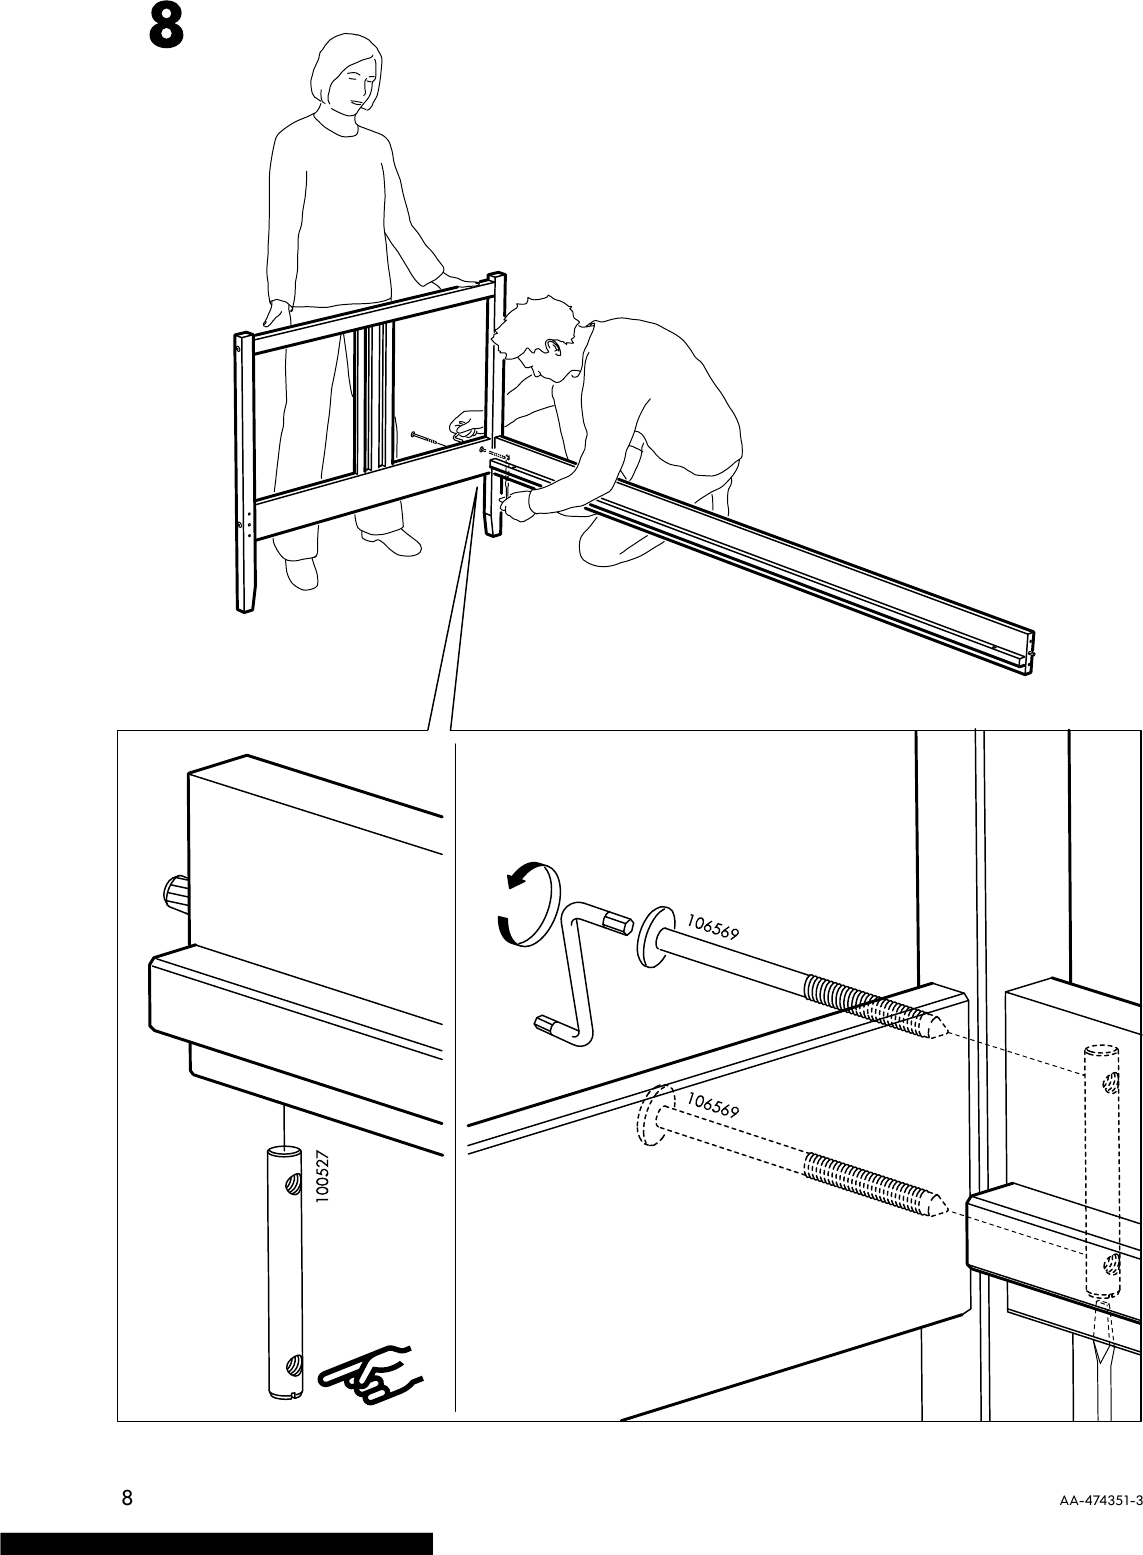 Page 8 of 12 - Ikea Ikea-Fjellse-Bed-Frame-Tw-Instructions-Manual-822426 ManualsLib - Makes It Easy To Find Manuals Online! User Manual